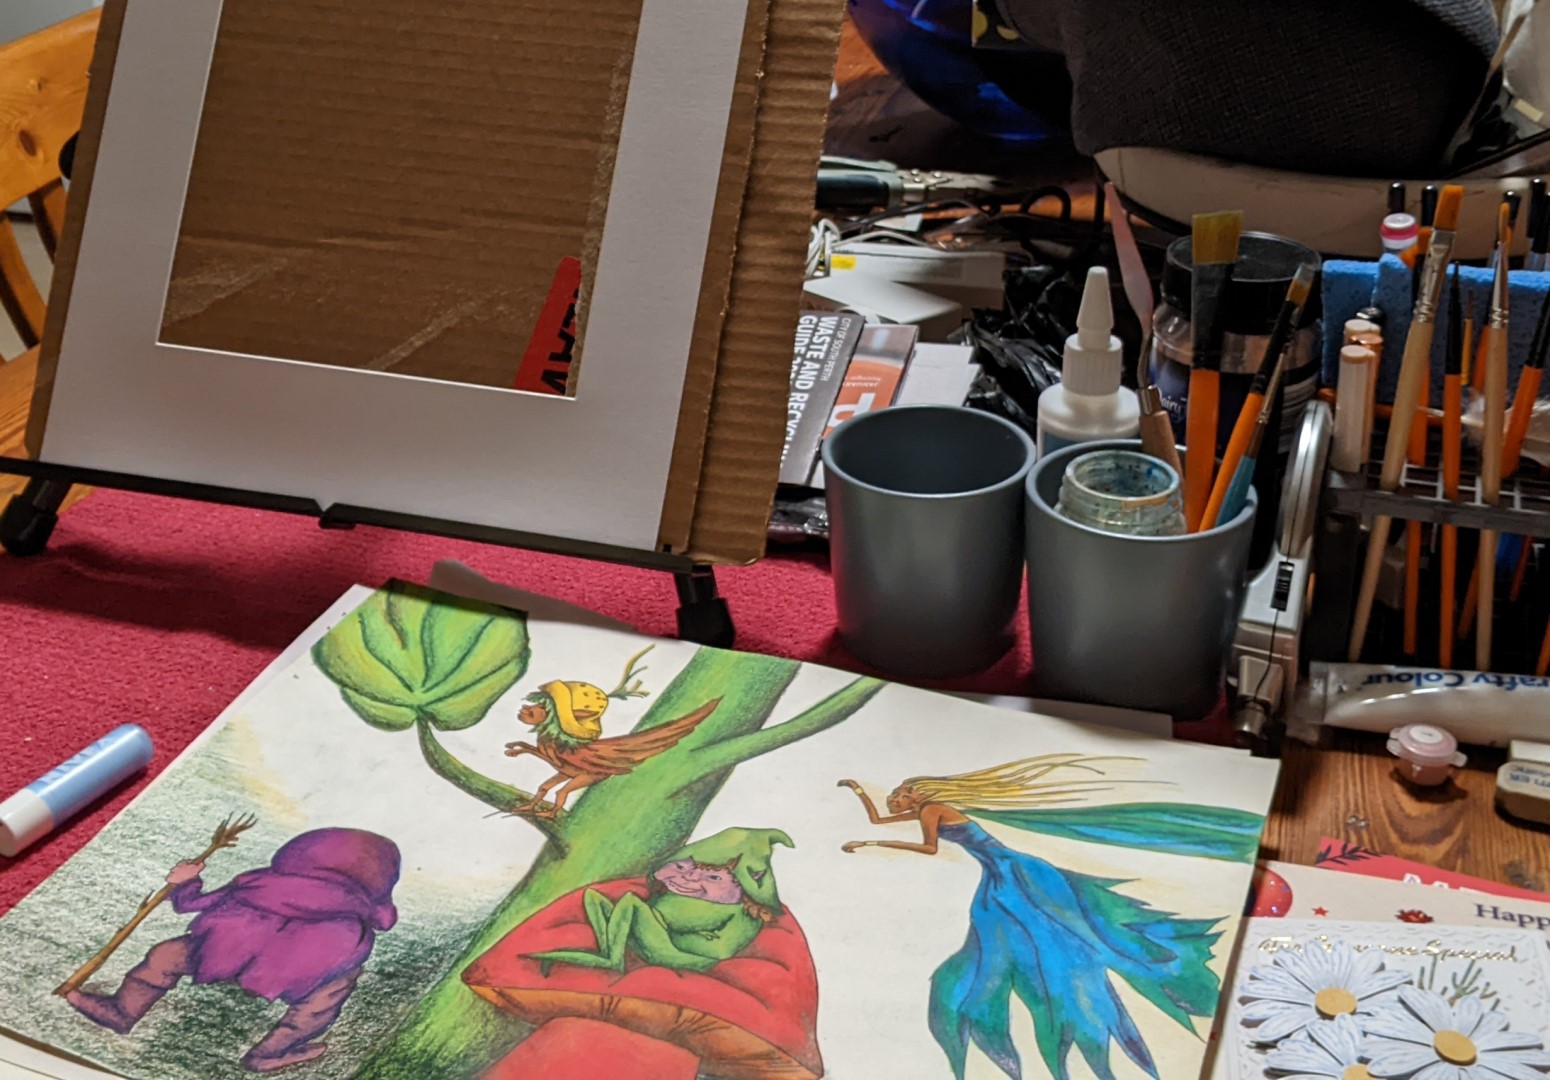 Sandra Burns ART Studio - a sneak peek inside the studio where the artwork is made - drawings, paintings, the easel, paint brushes, water mugs and more